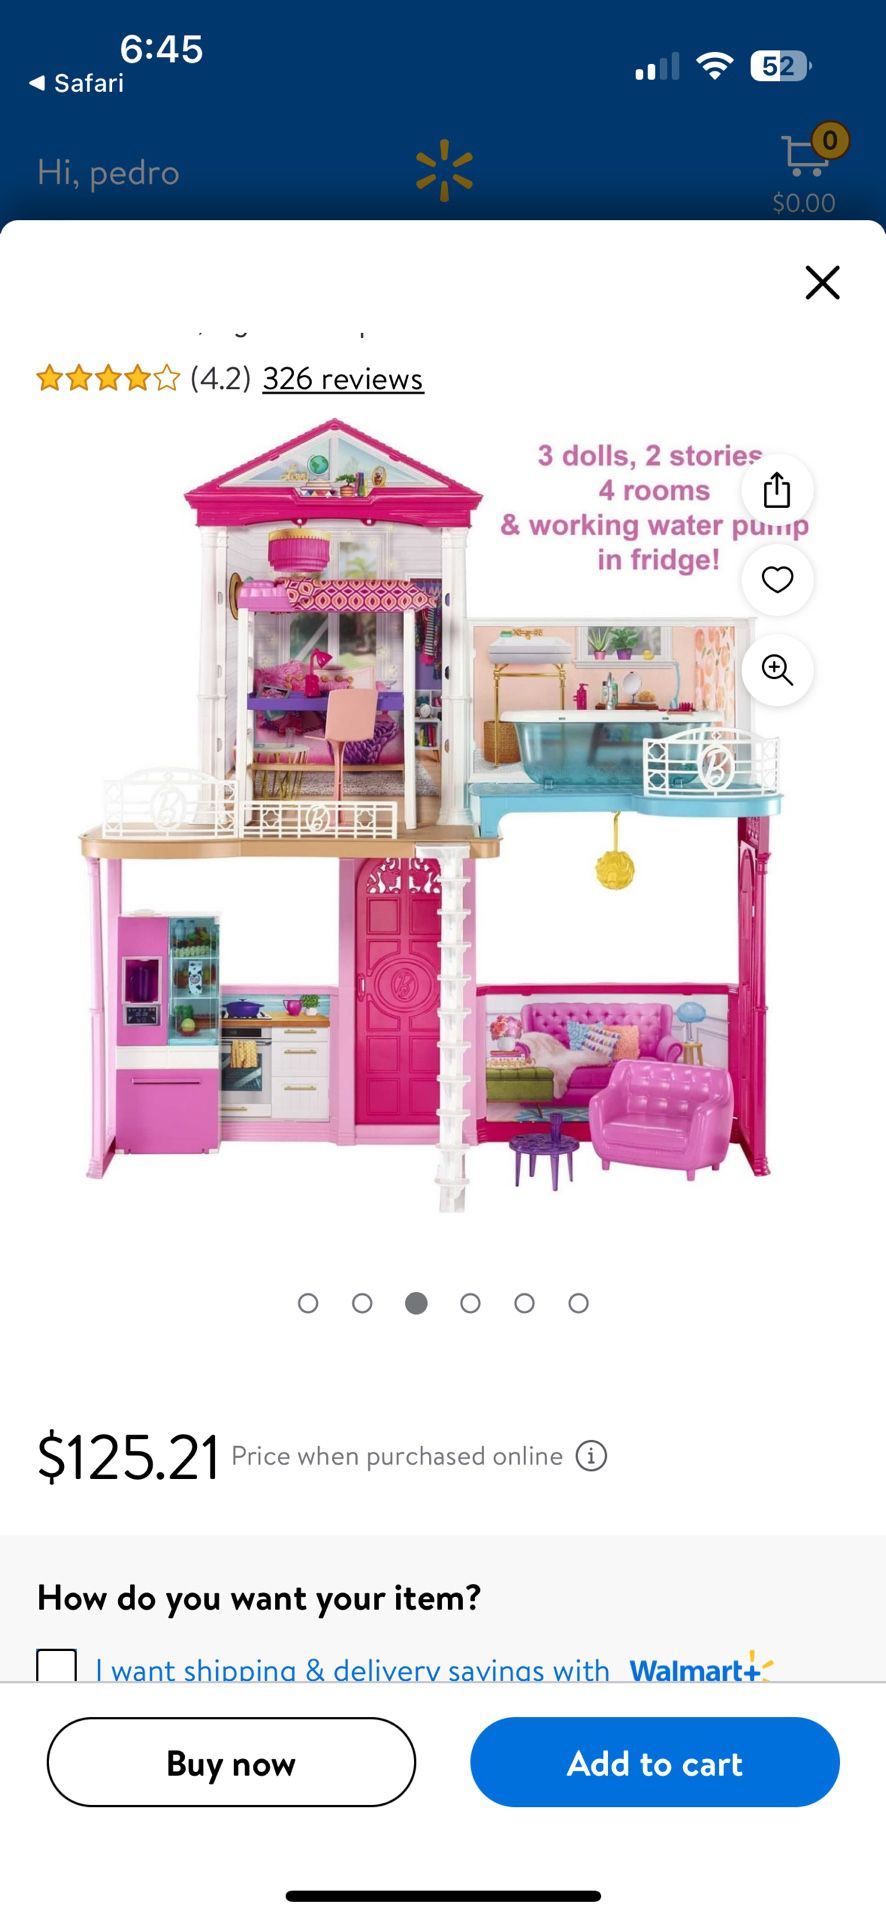 Barbie Dollhouse Set with 3 Dolls and Furniture, Pool and Accessories, Ages 4 & up